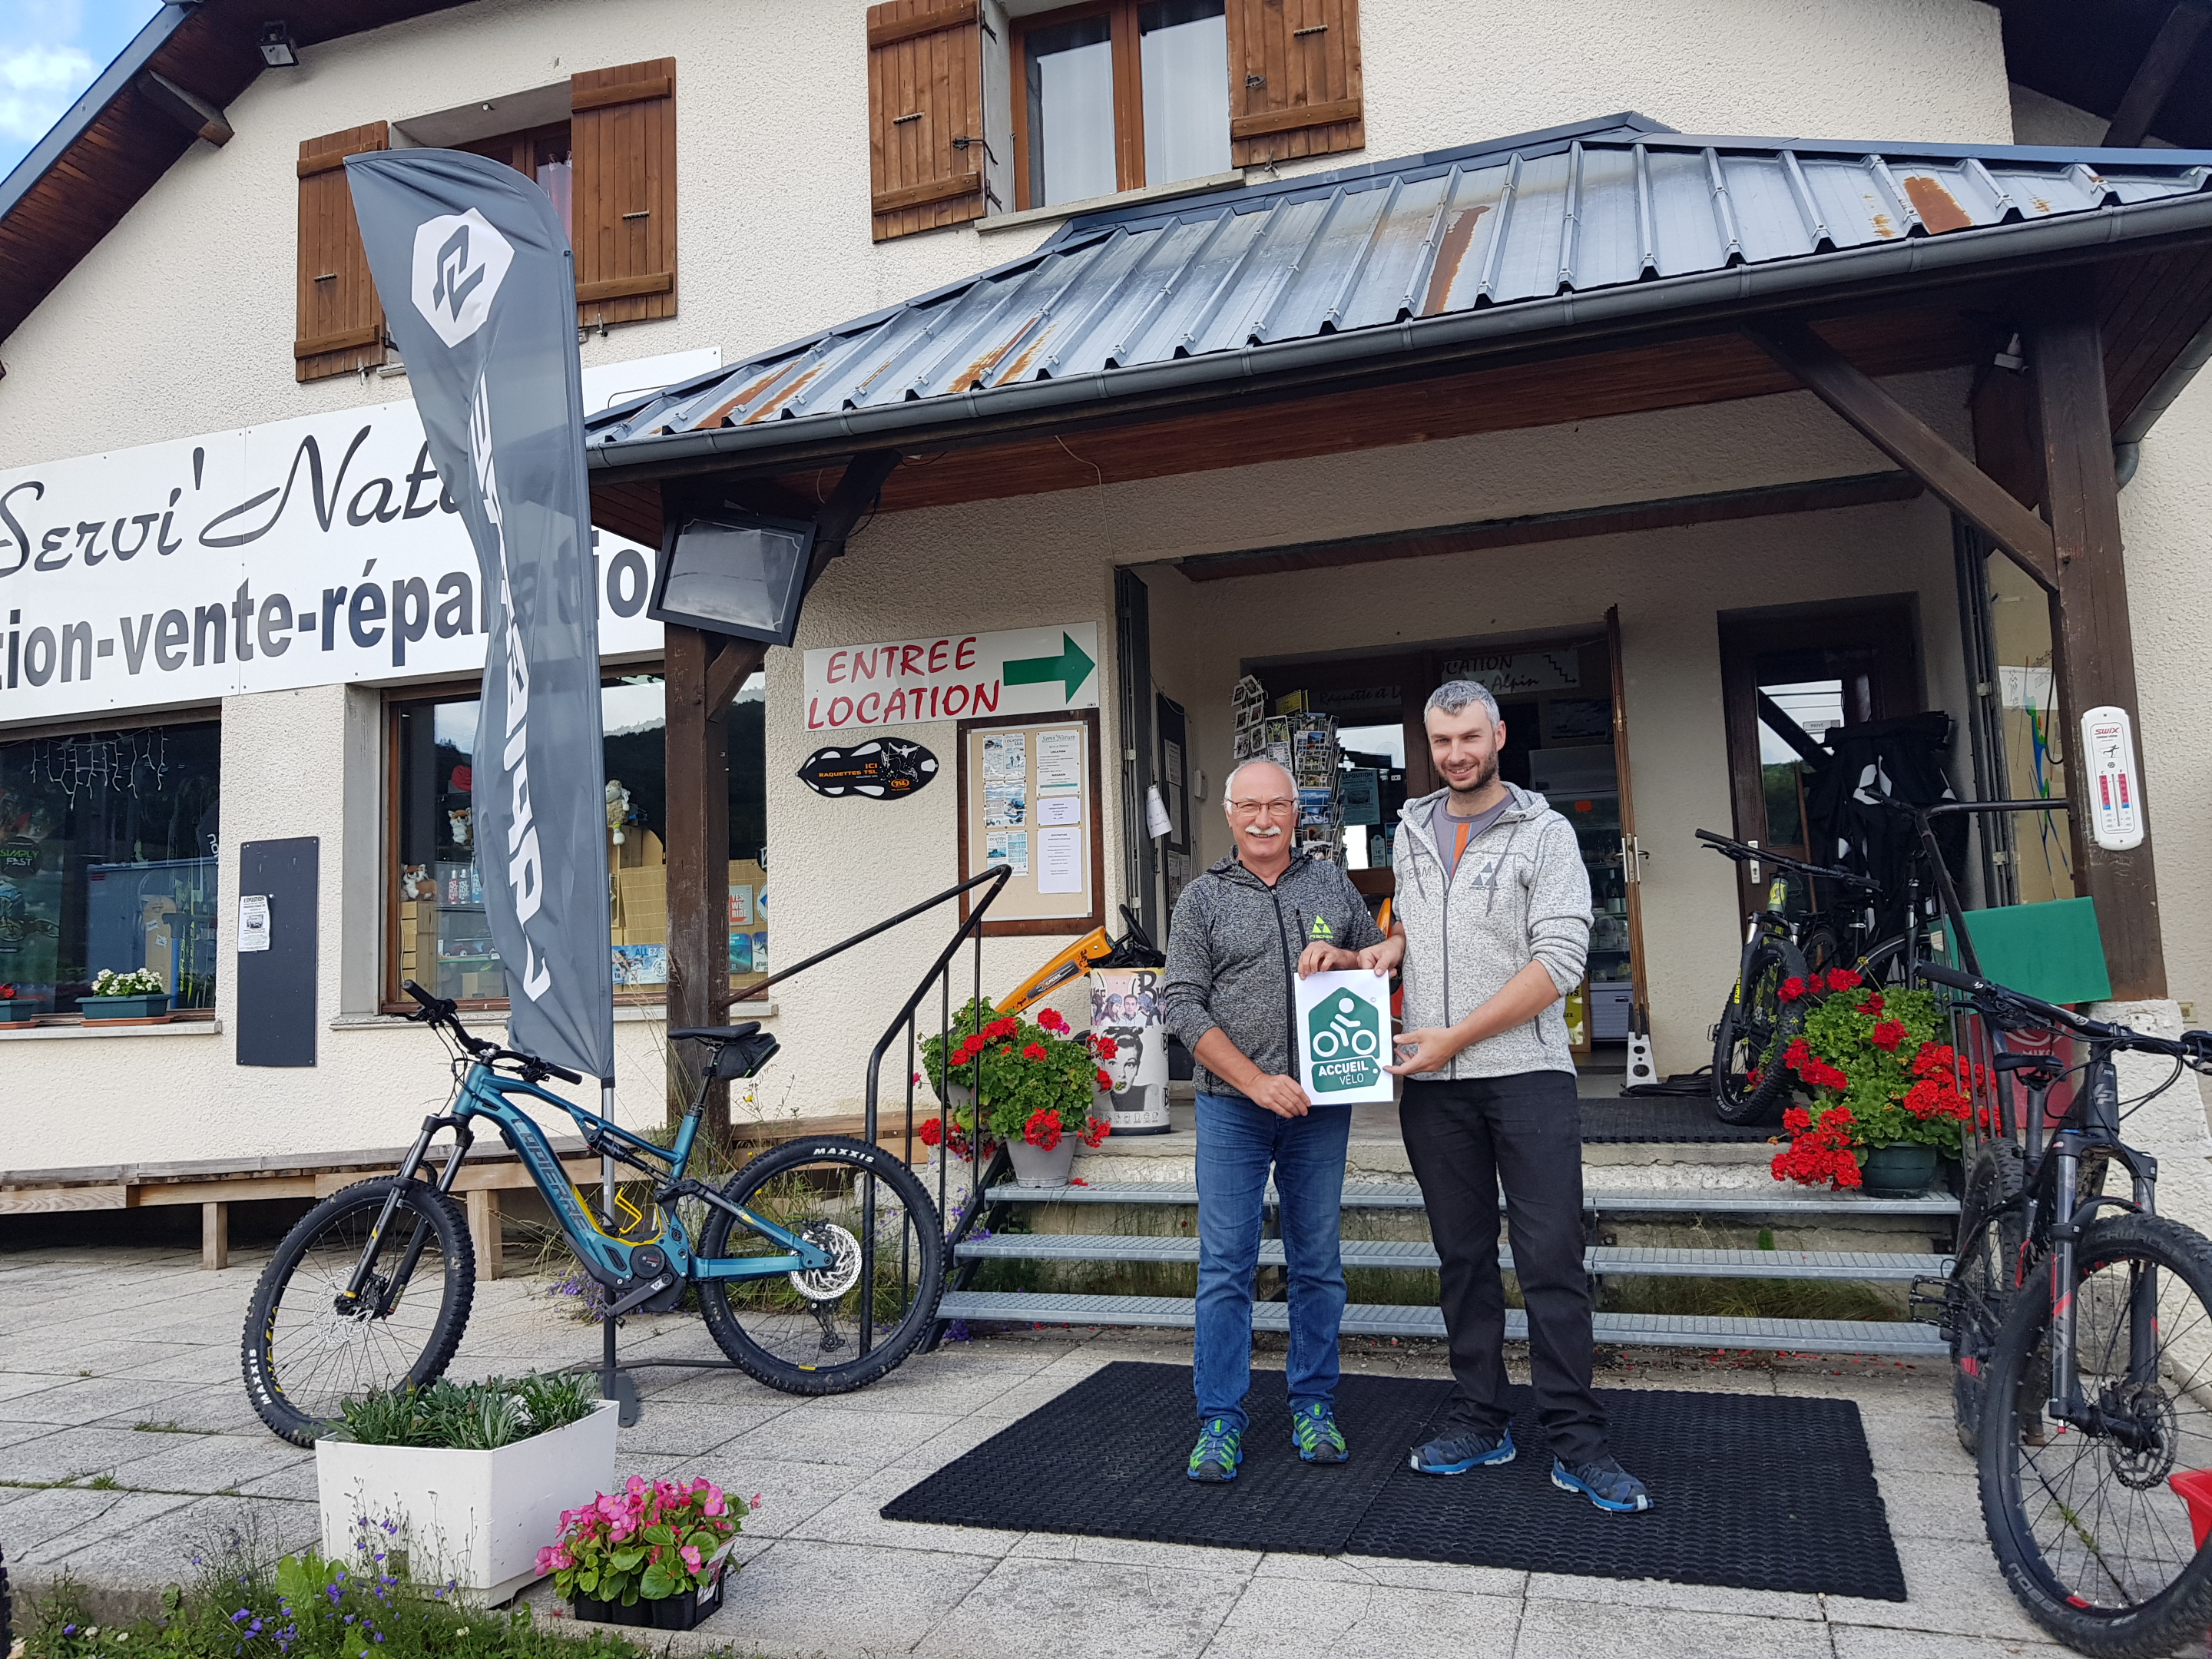 Servi'Nature: rental and repair of mountain and road bikes, electrically assisted bicycles and rental of ski wheels and rollerblades